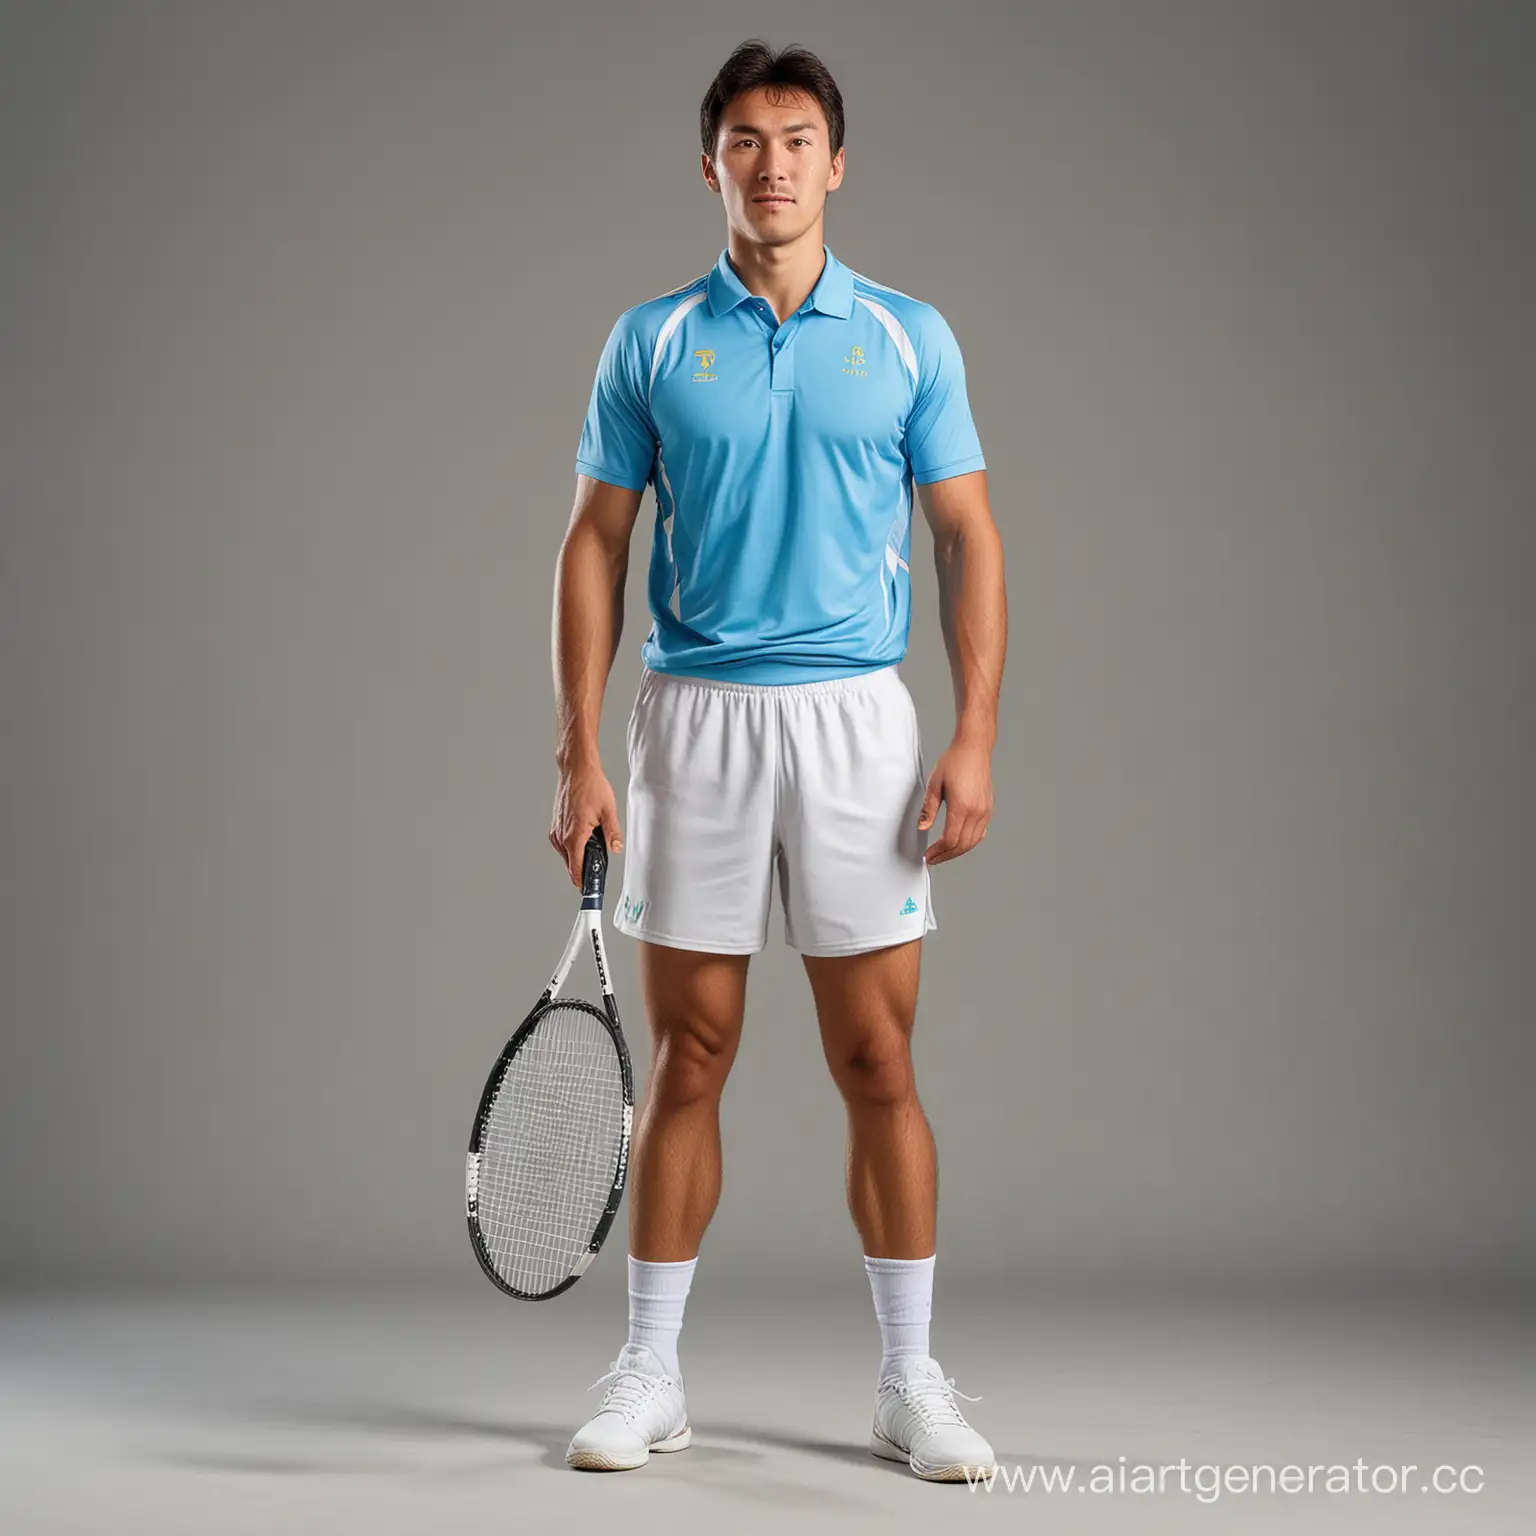 Kazakh-Tennis-Player-in-Full-Height-Action